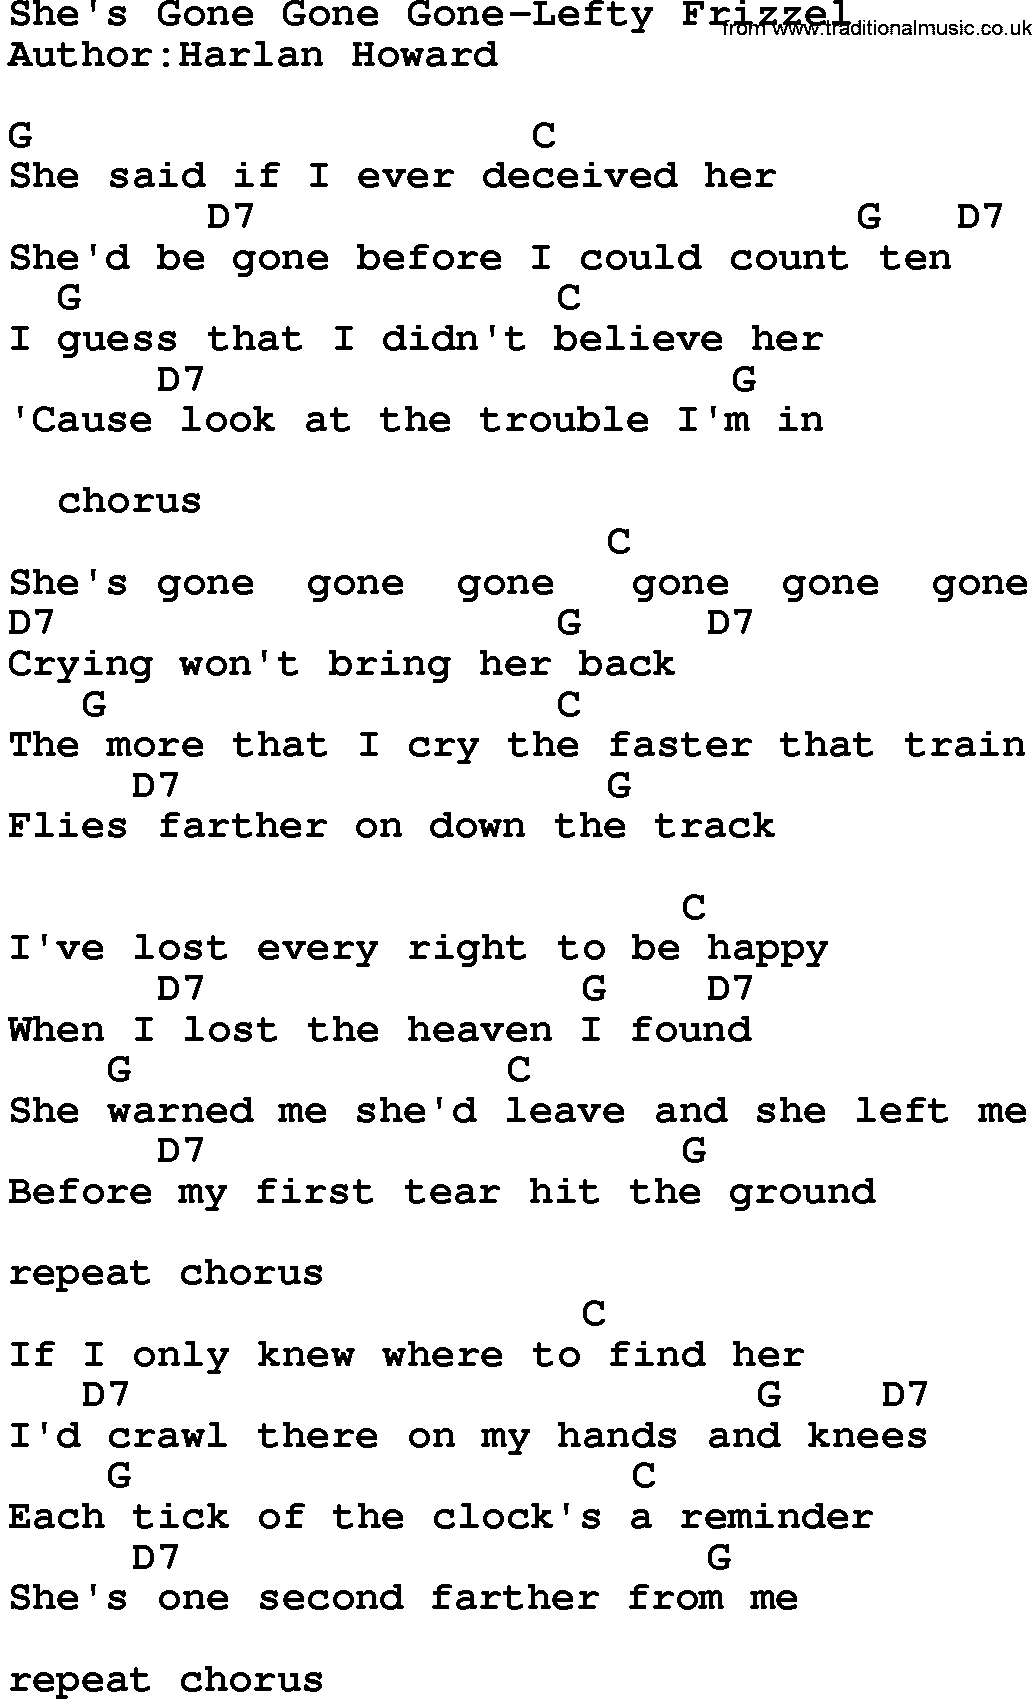 Country music song: She's Gone Gone Gone-Lefty Frizzel lyrics and chords